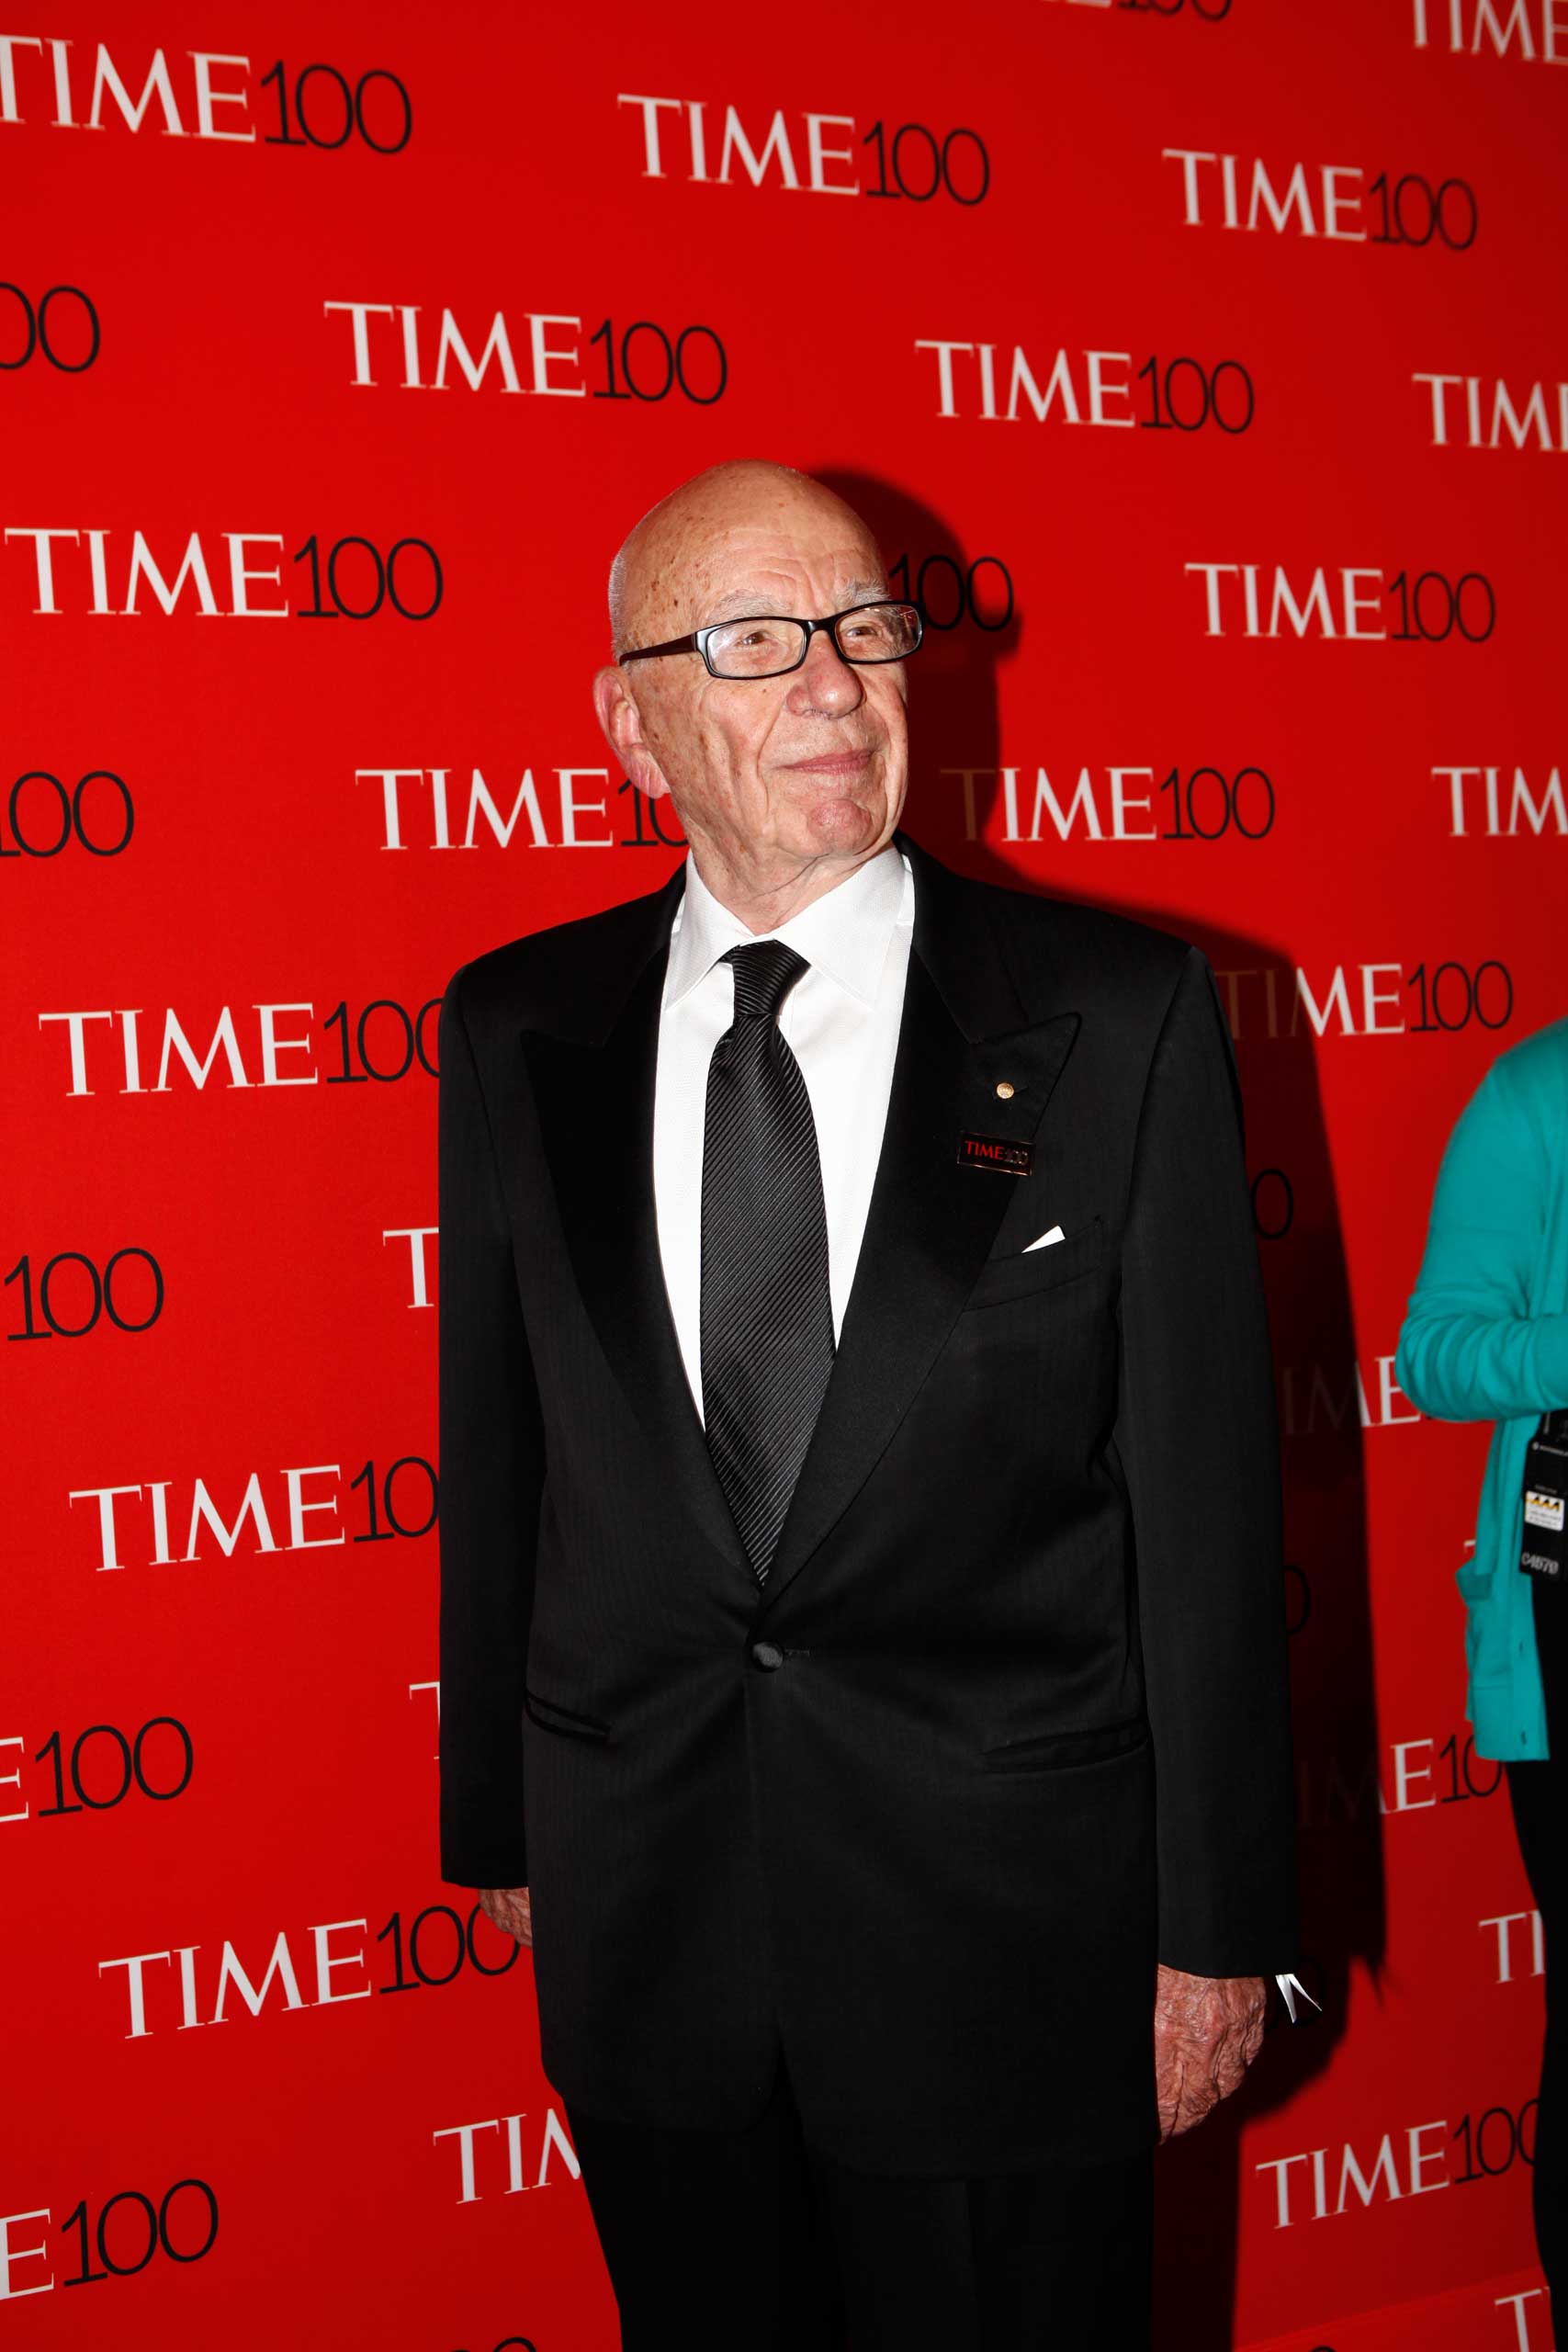 Rupert Murdoch attends the TIME 100 Gala at Lincoln Center in New York, NY on Apr. 21, 2015.